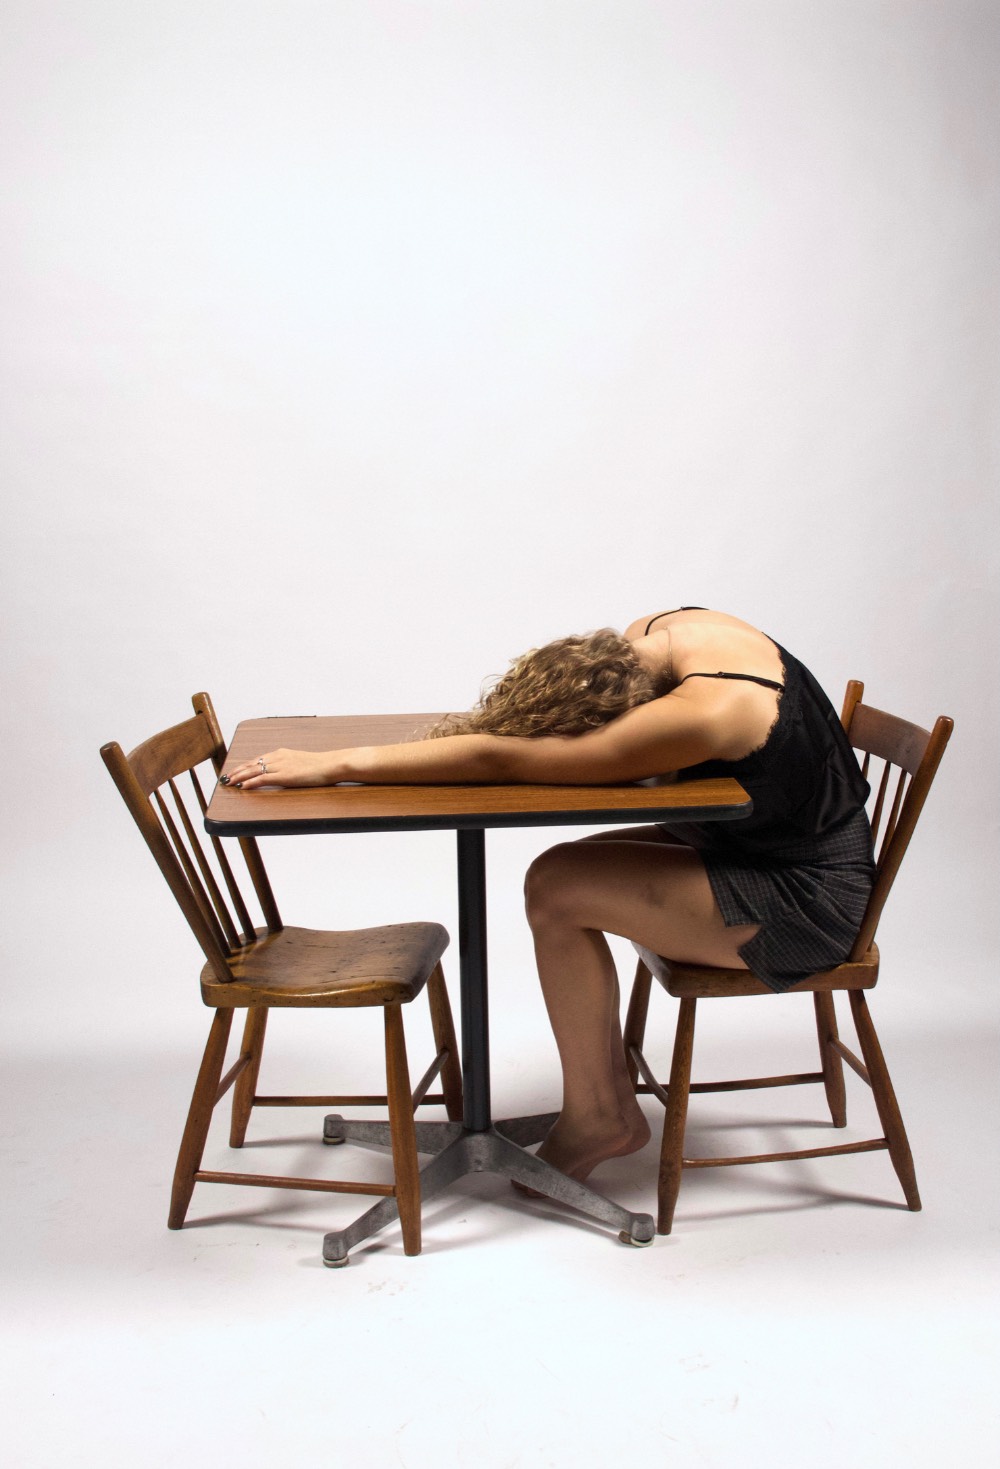 A side view of a woman in a black slip passed out on a table with two chairs.